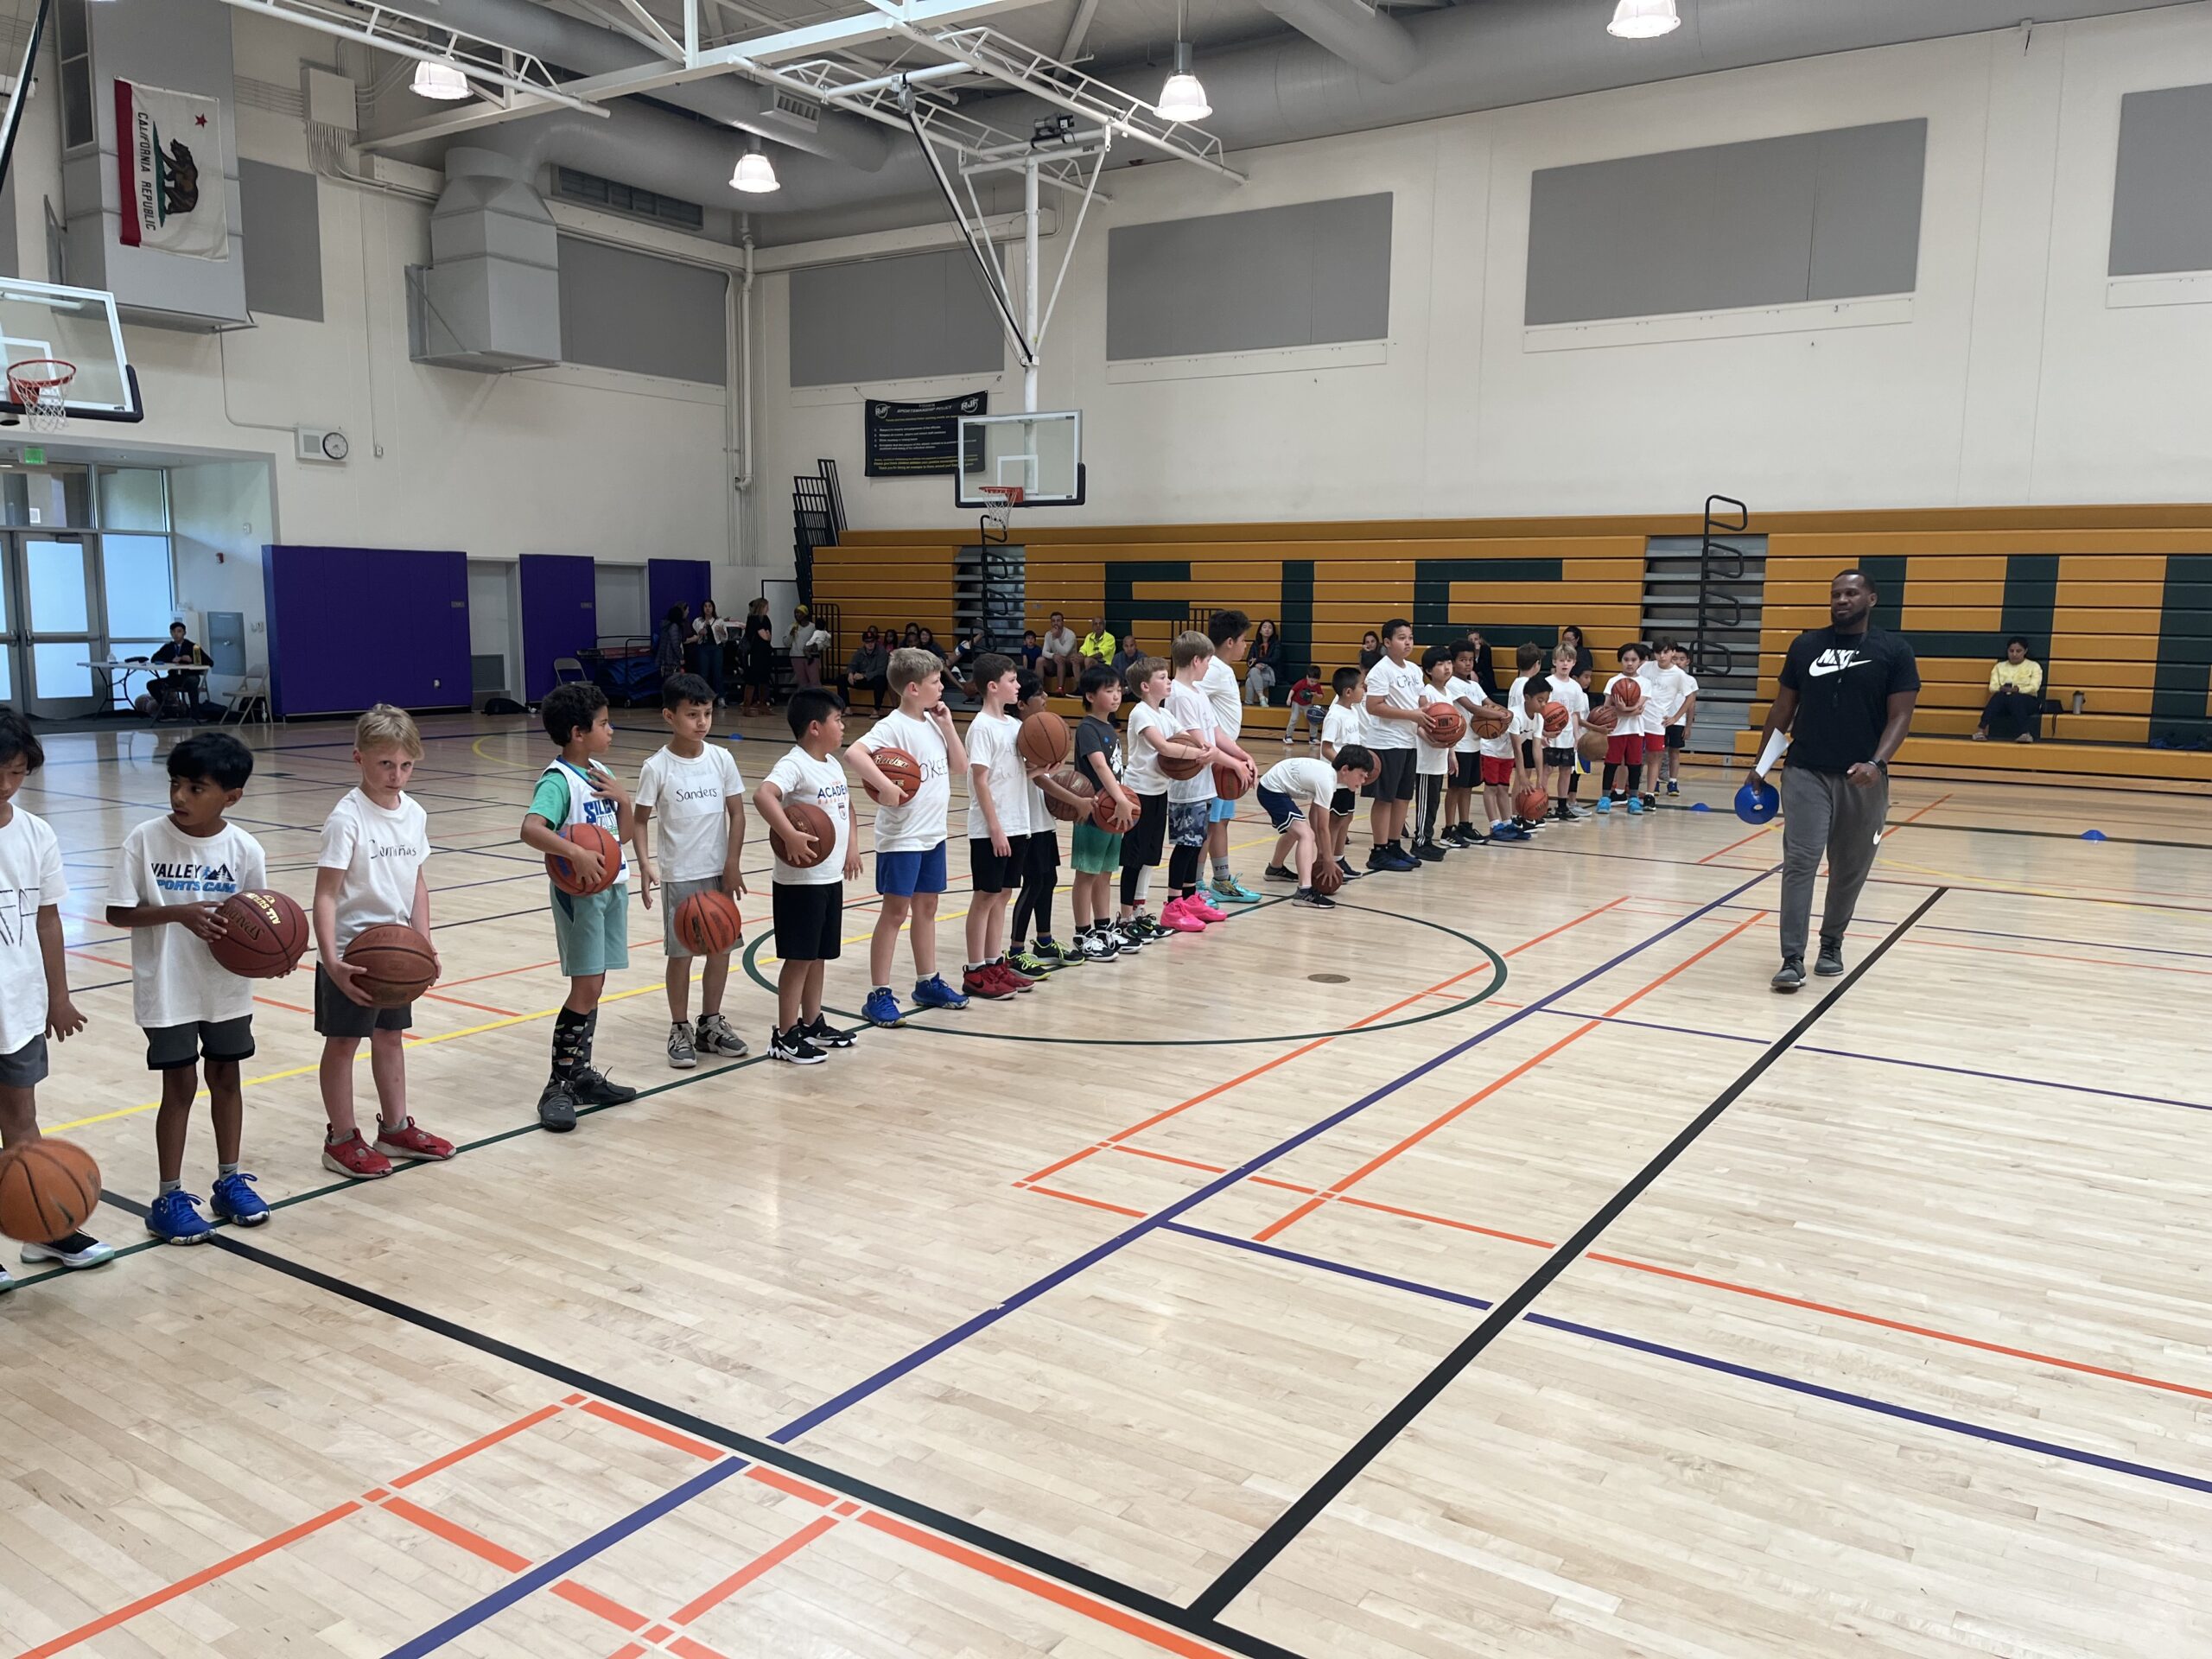 Kids lined up with basketballs with coach Will